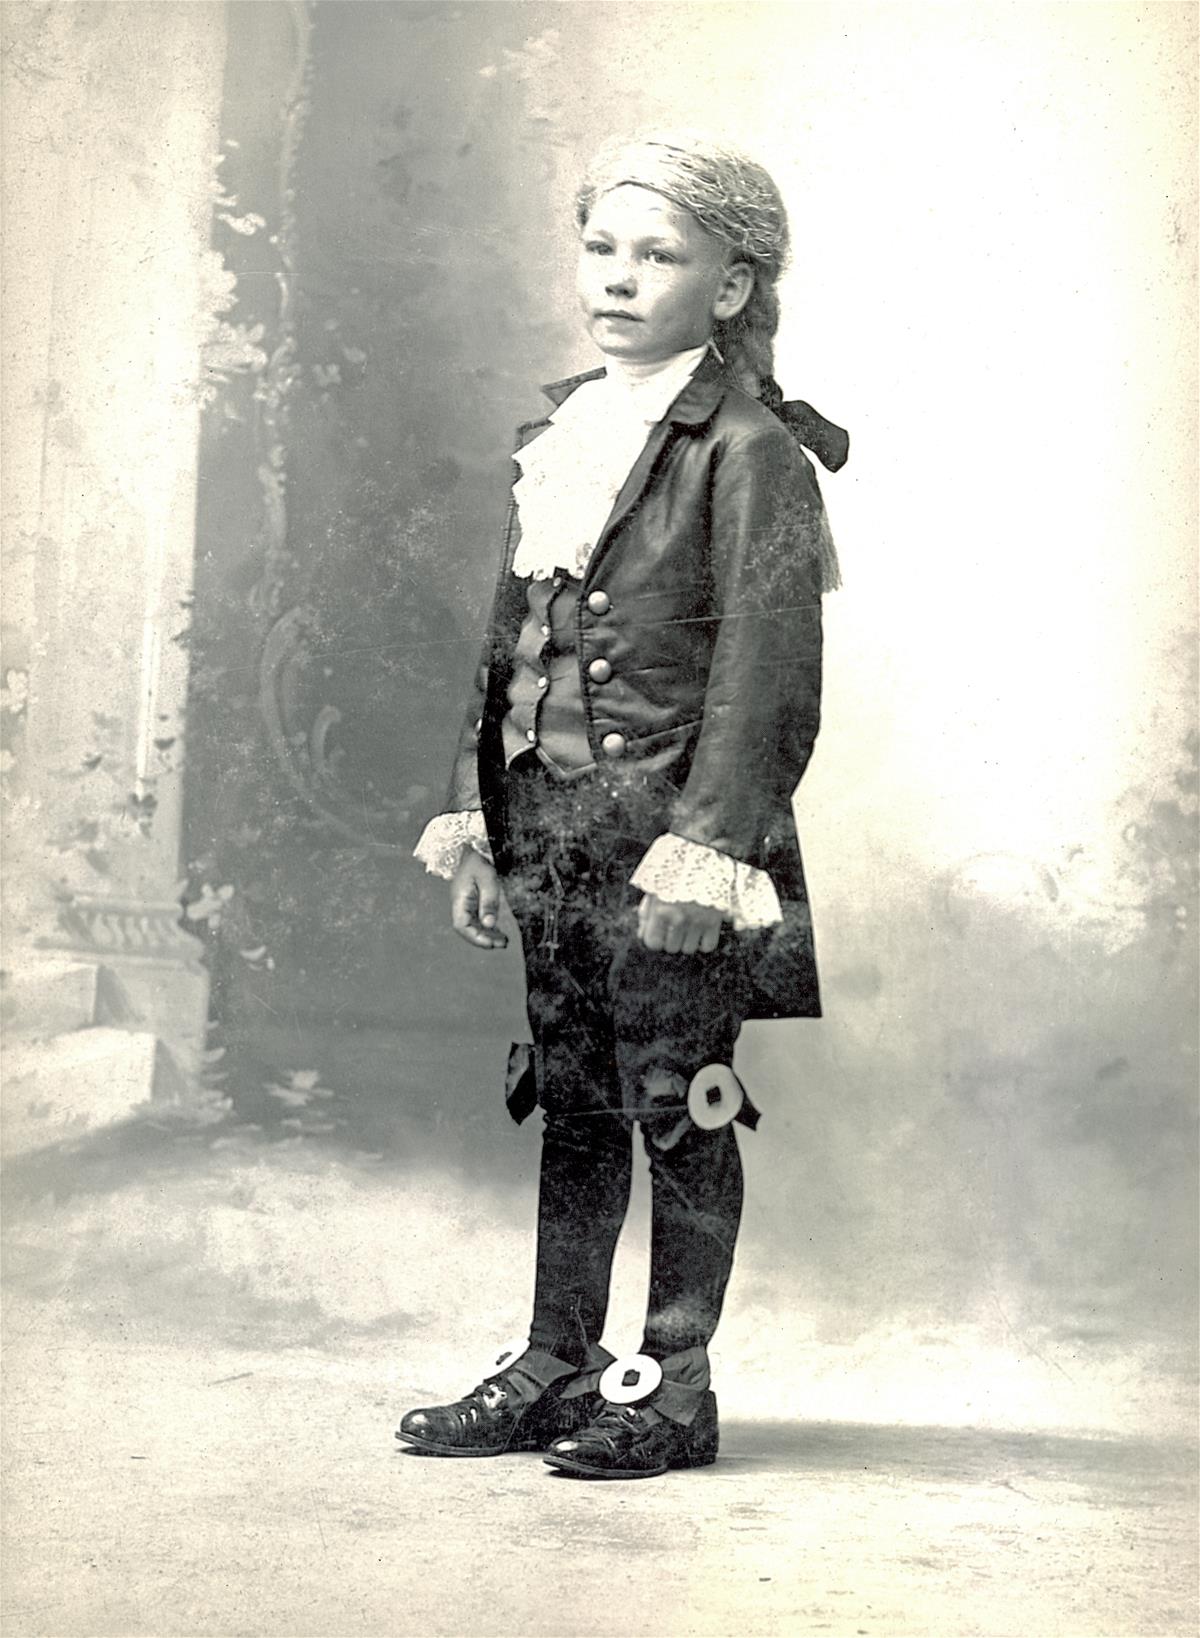 A portrait of Arnold Beckman as a child.